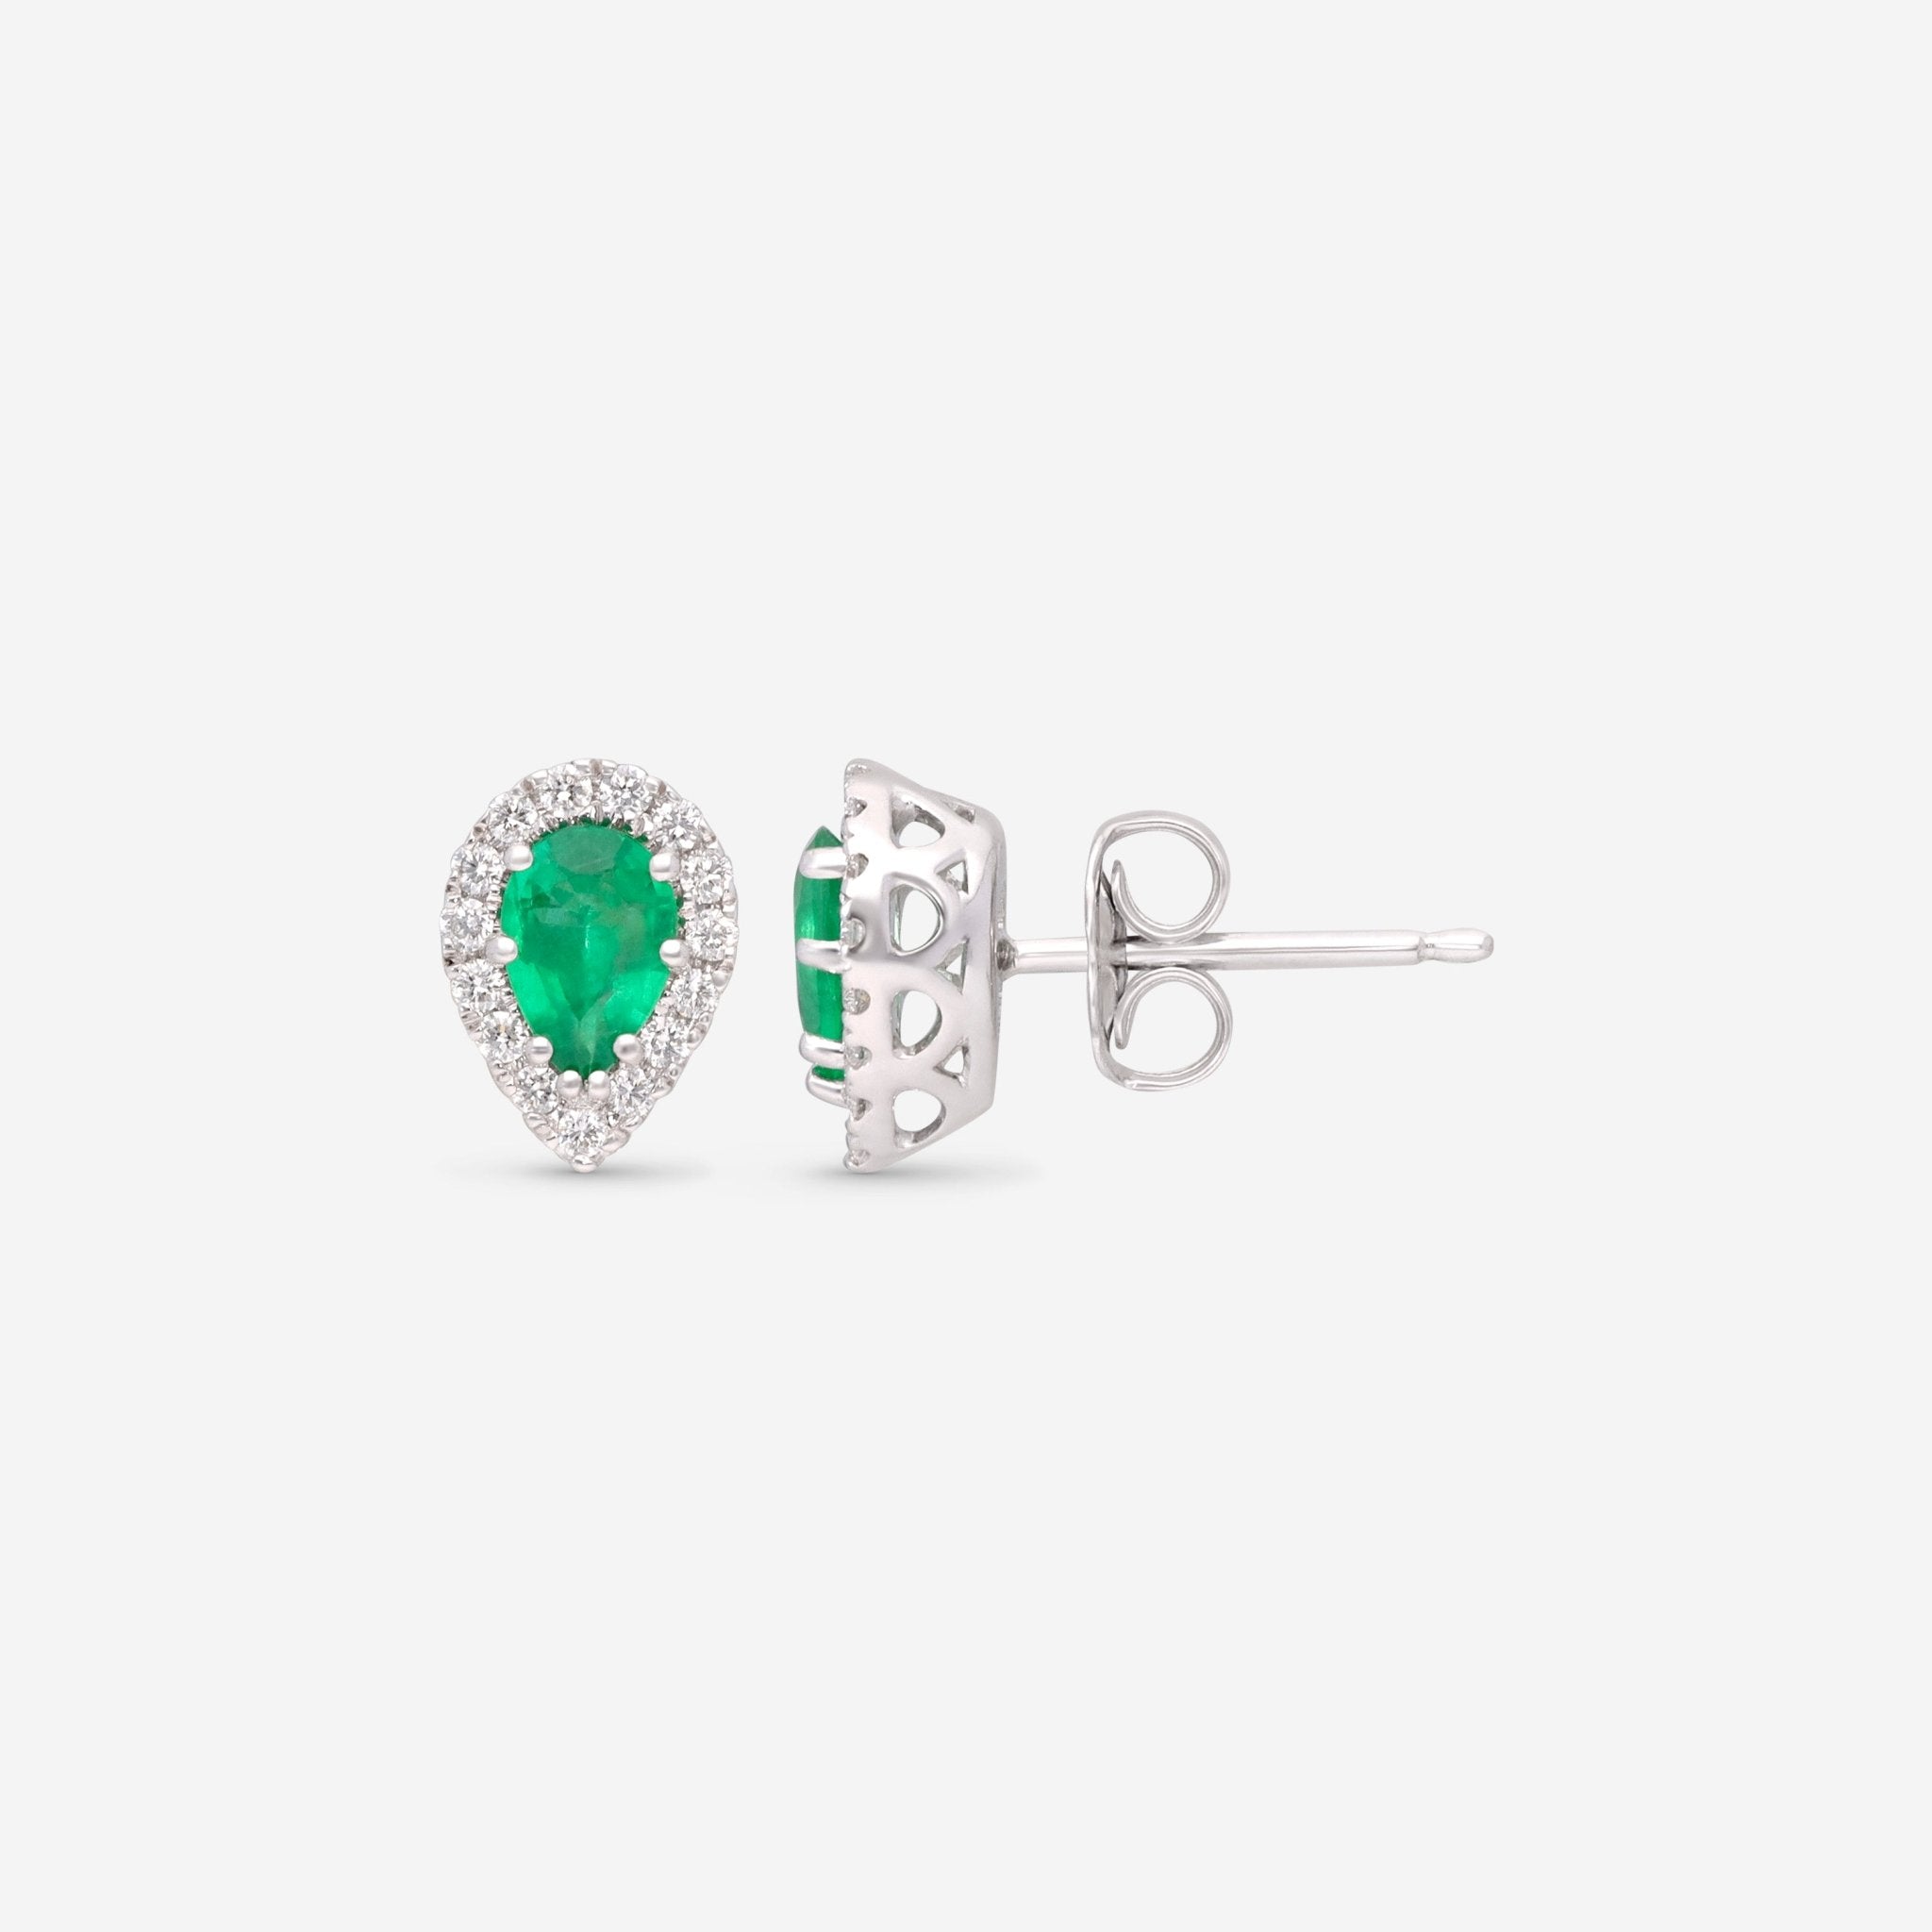 Ina Mar 14K White Gold Pear Shaped Emerald with Diamond Halo Stud Earrings - THE SOLIST - Ina Mar